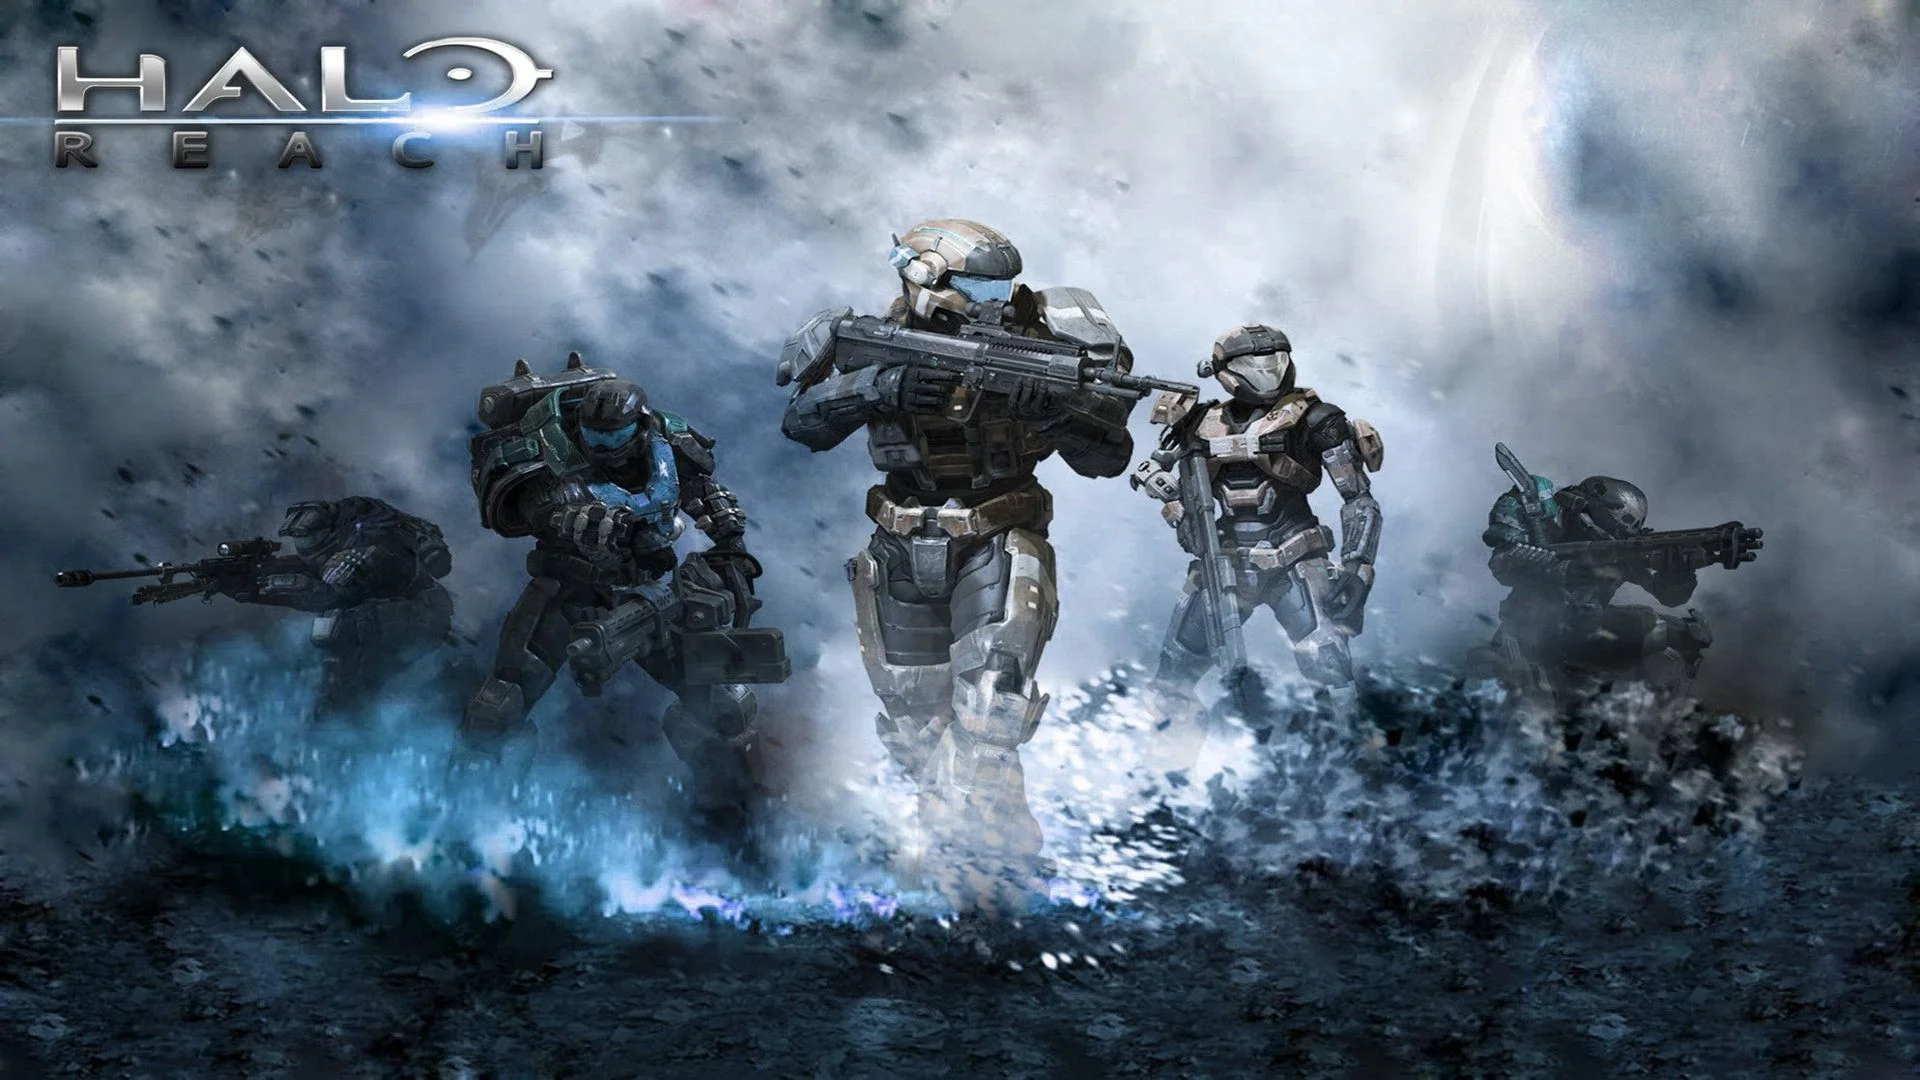 Halo HD Wallpapers Backgrounds Wallpaper 1920Ã1200 Halo Wallpaper Hd (37  Wallpapers) |